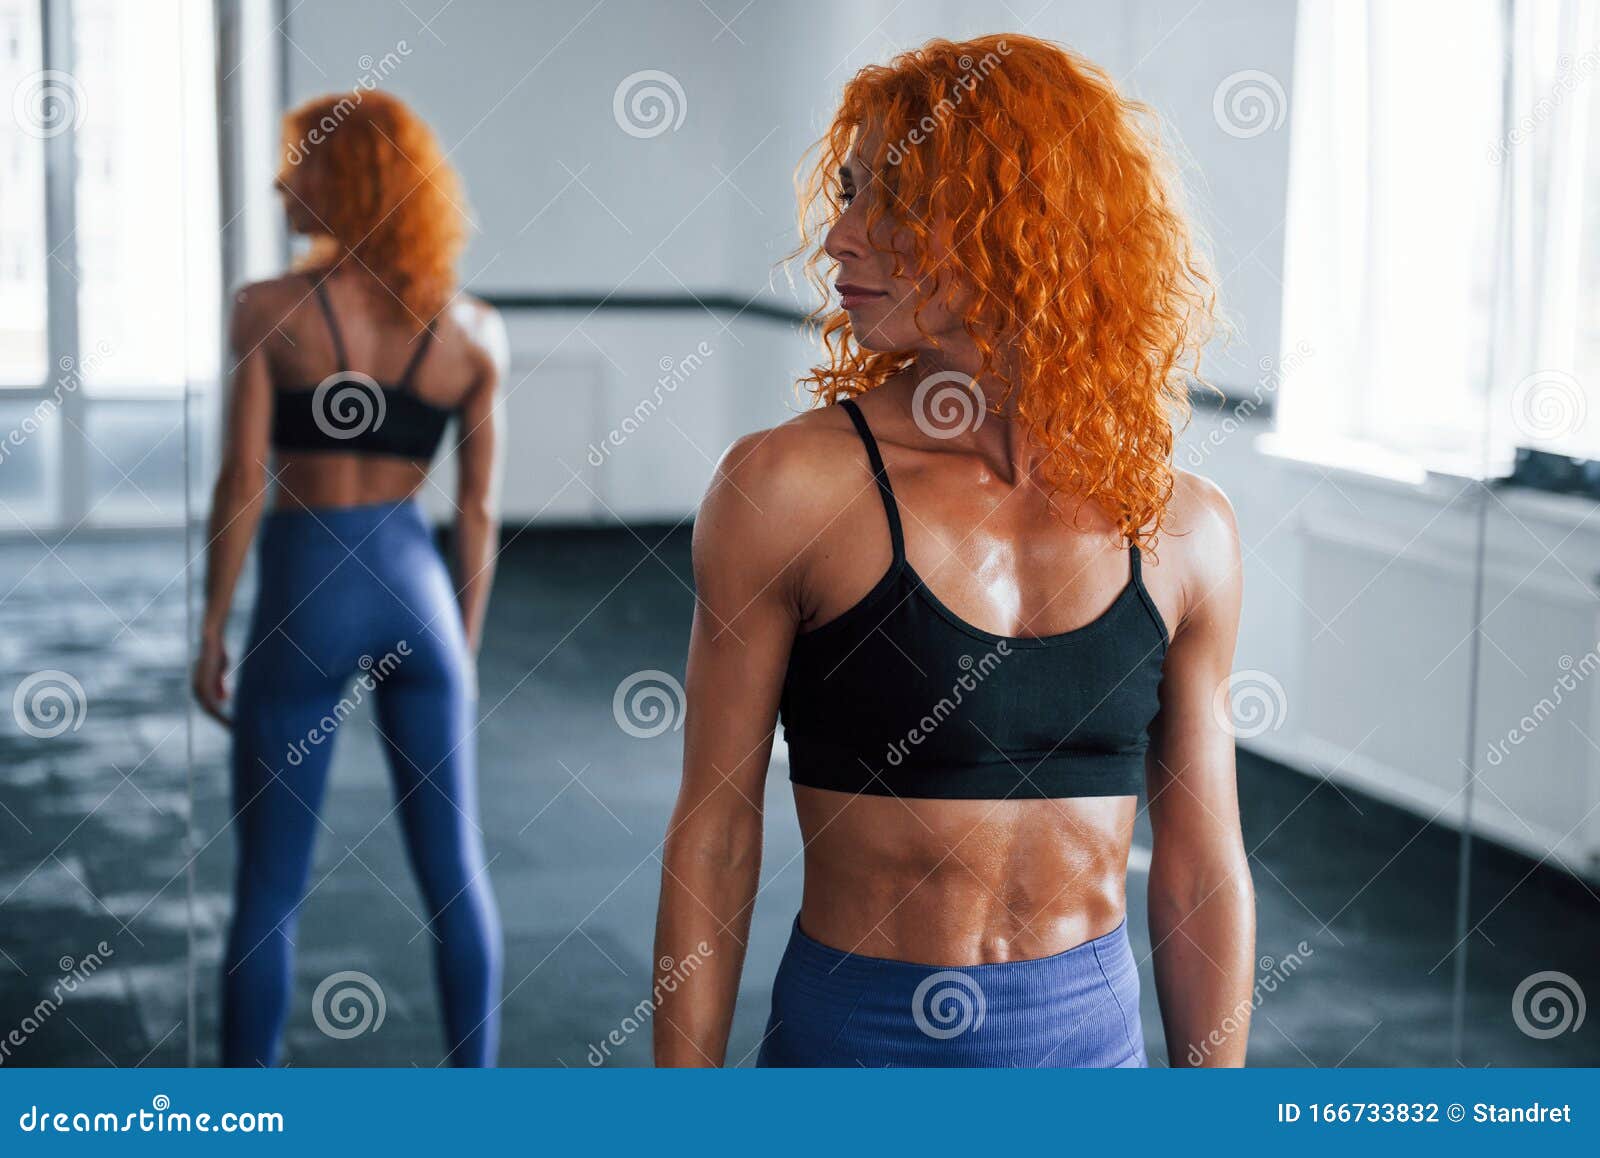 Fit Redheads